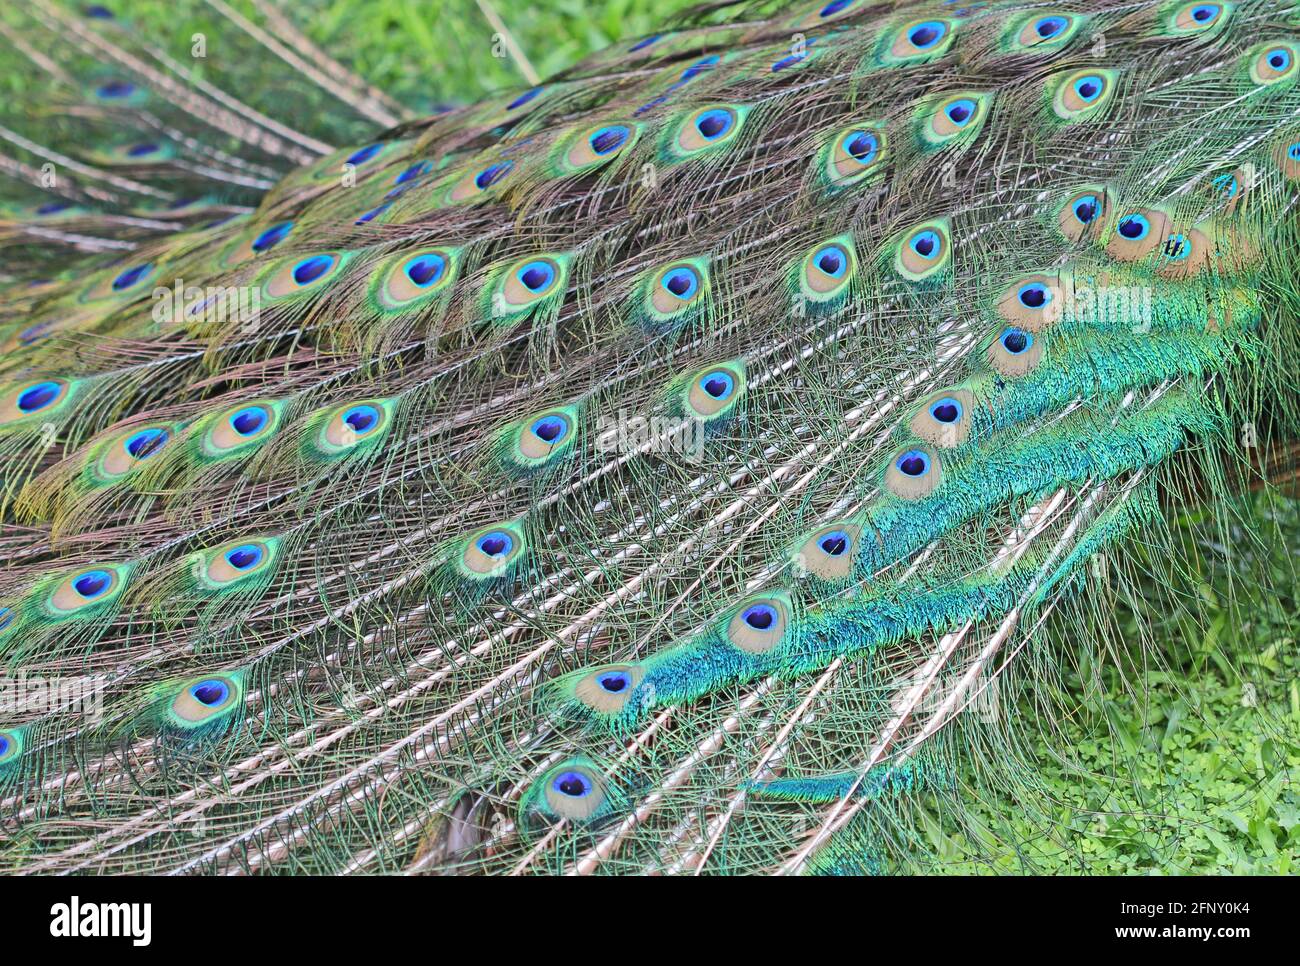 Peacock's tail Stock Photo